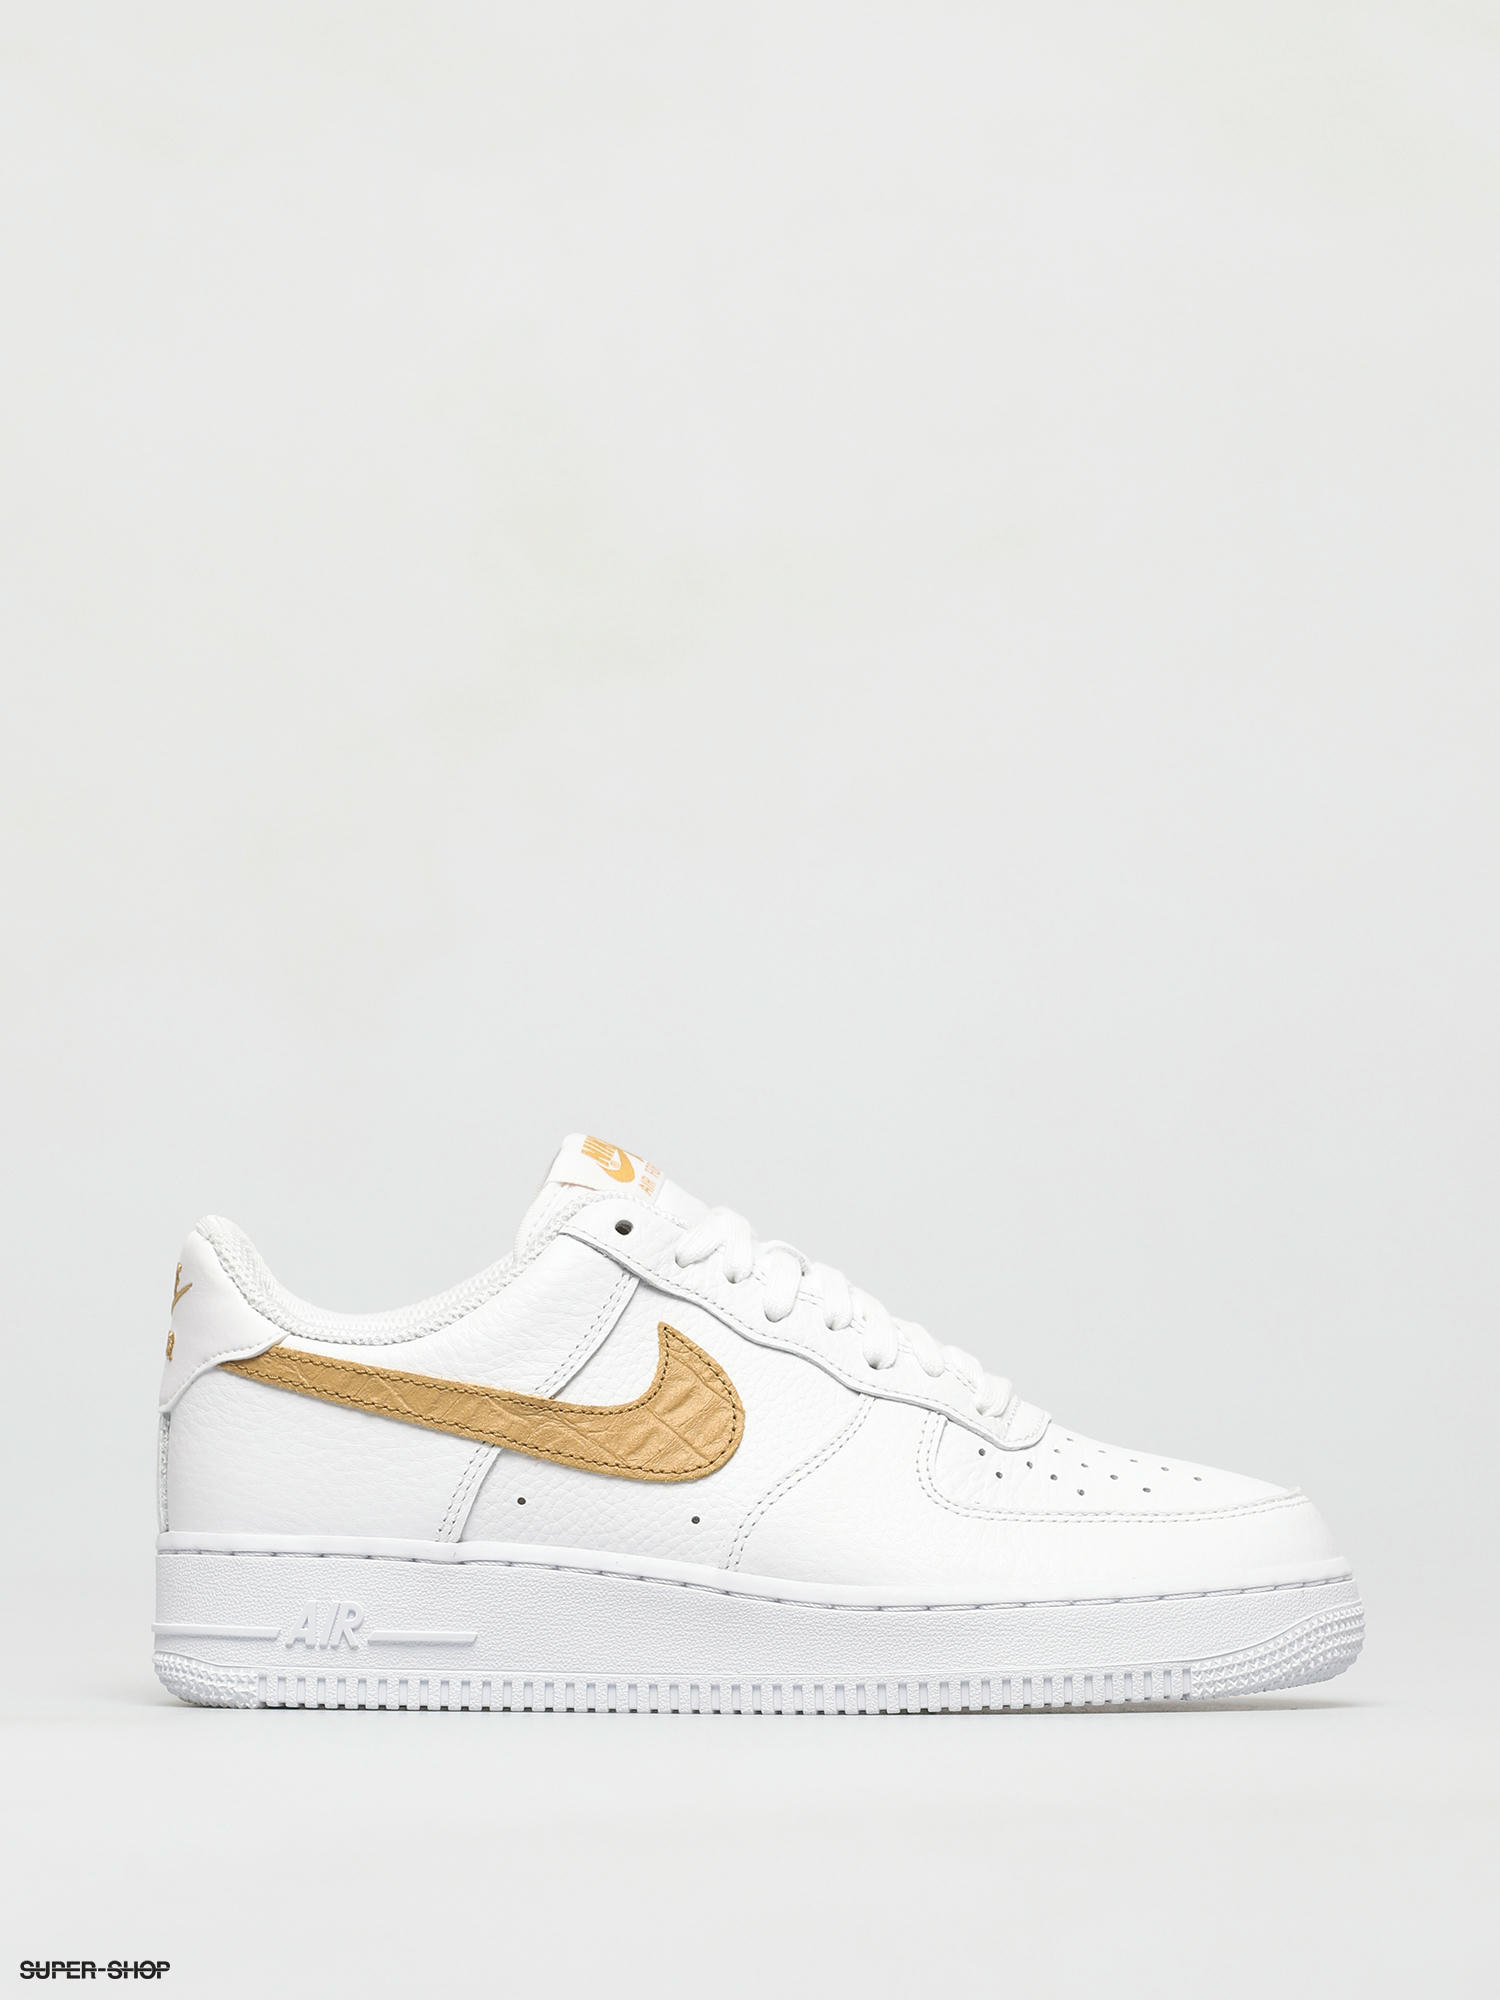 nike air force lv8 gold